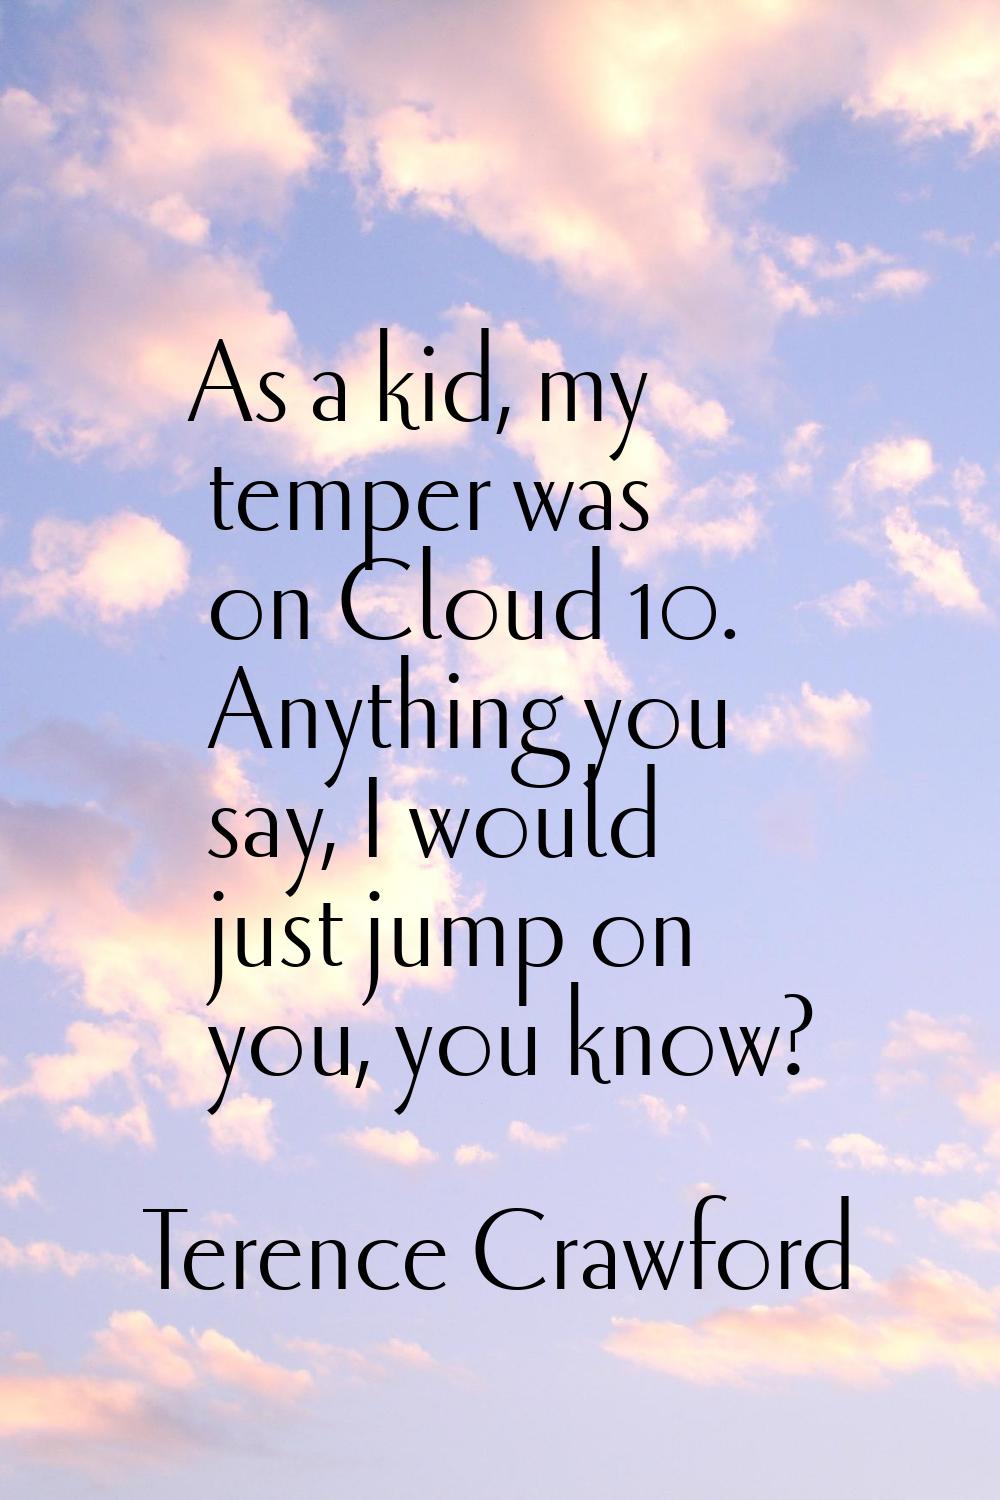 As a kid, my temper was on Cloud 10. Anything you say, I would just jump on you, you know?